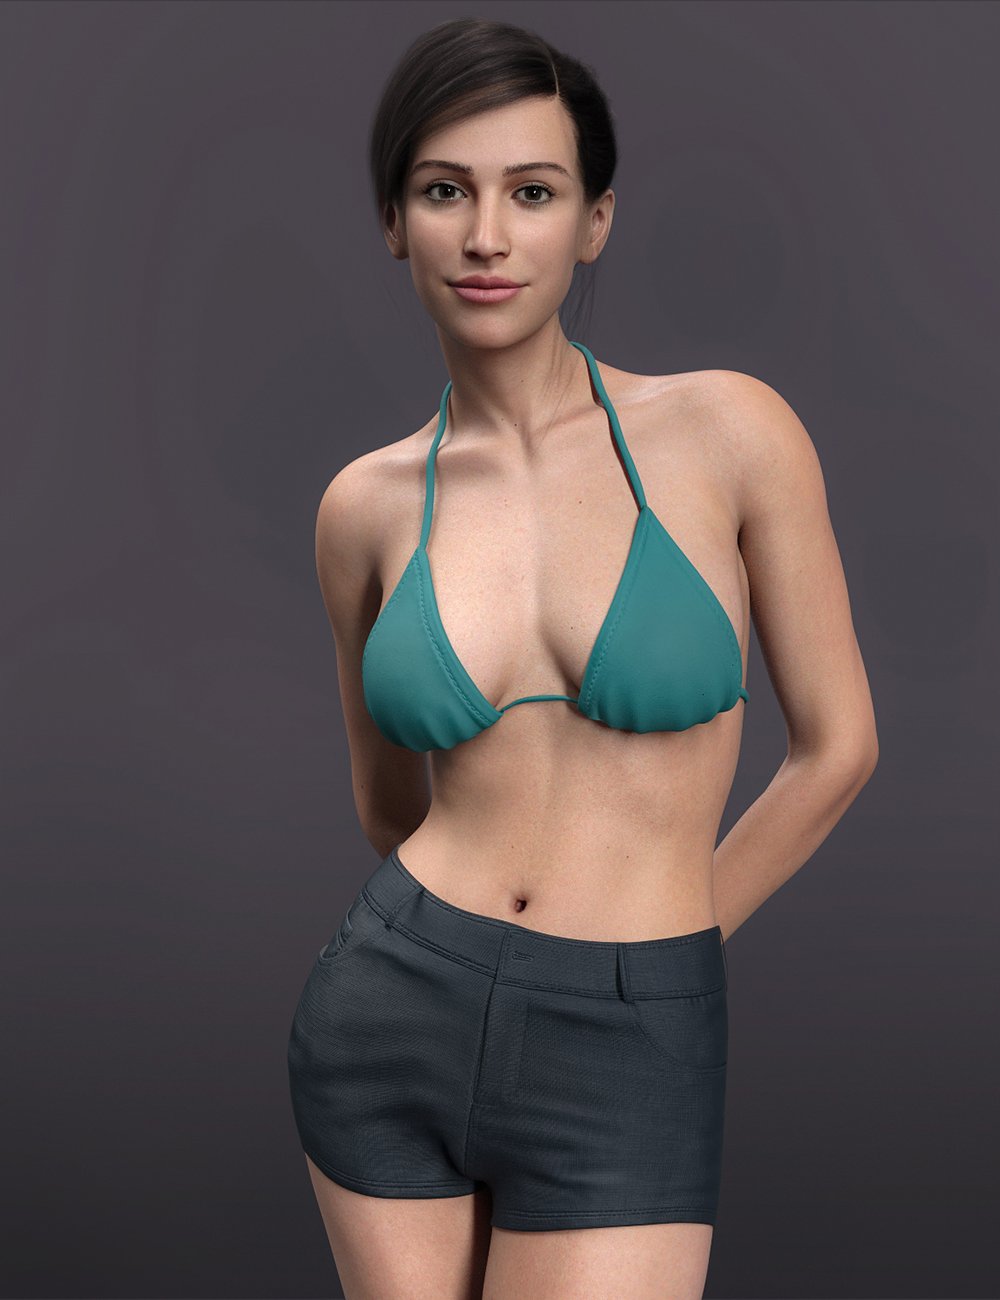 Elanor for Genesis 9 by: Carboncrow, 3D Models by Daz 3D